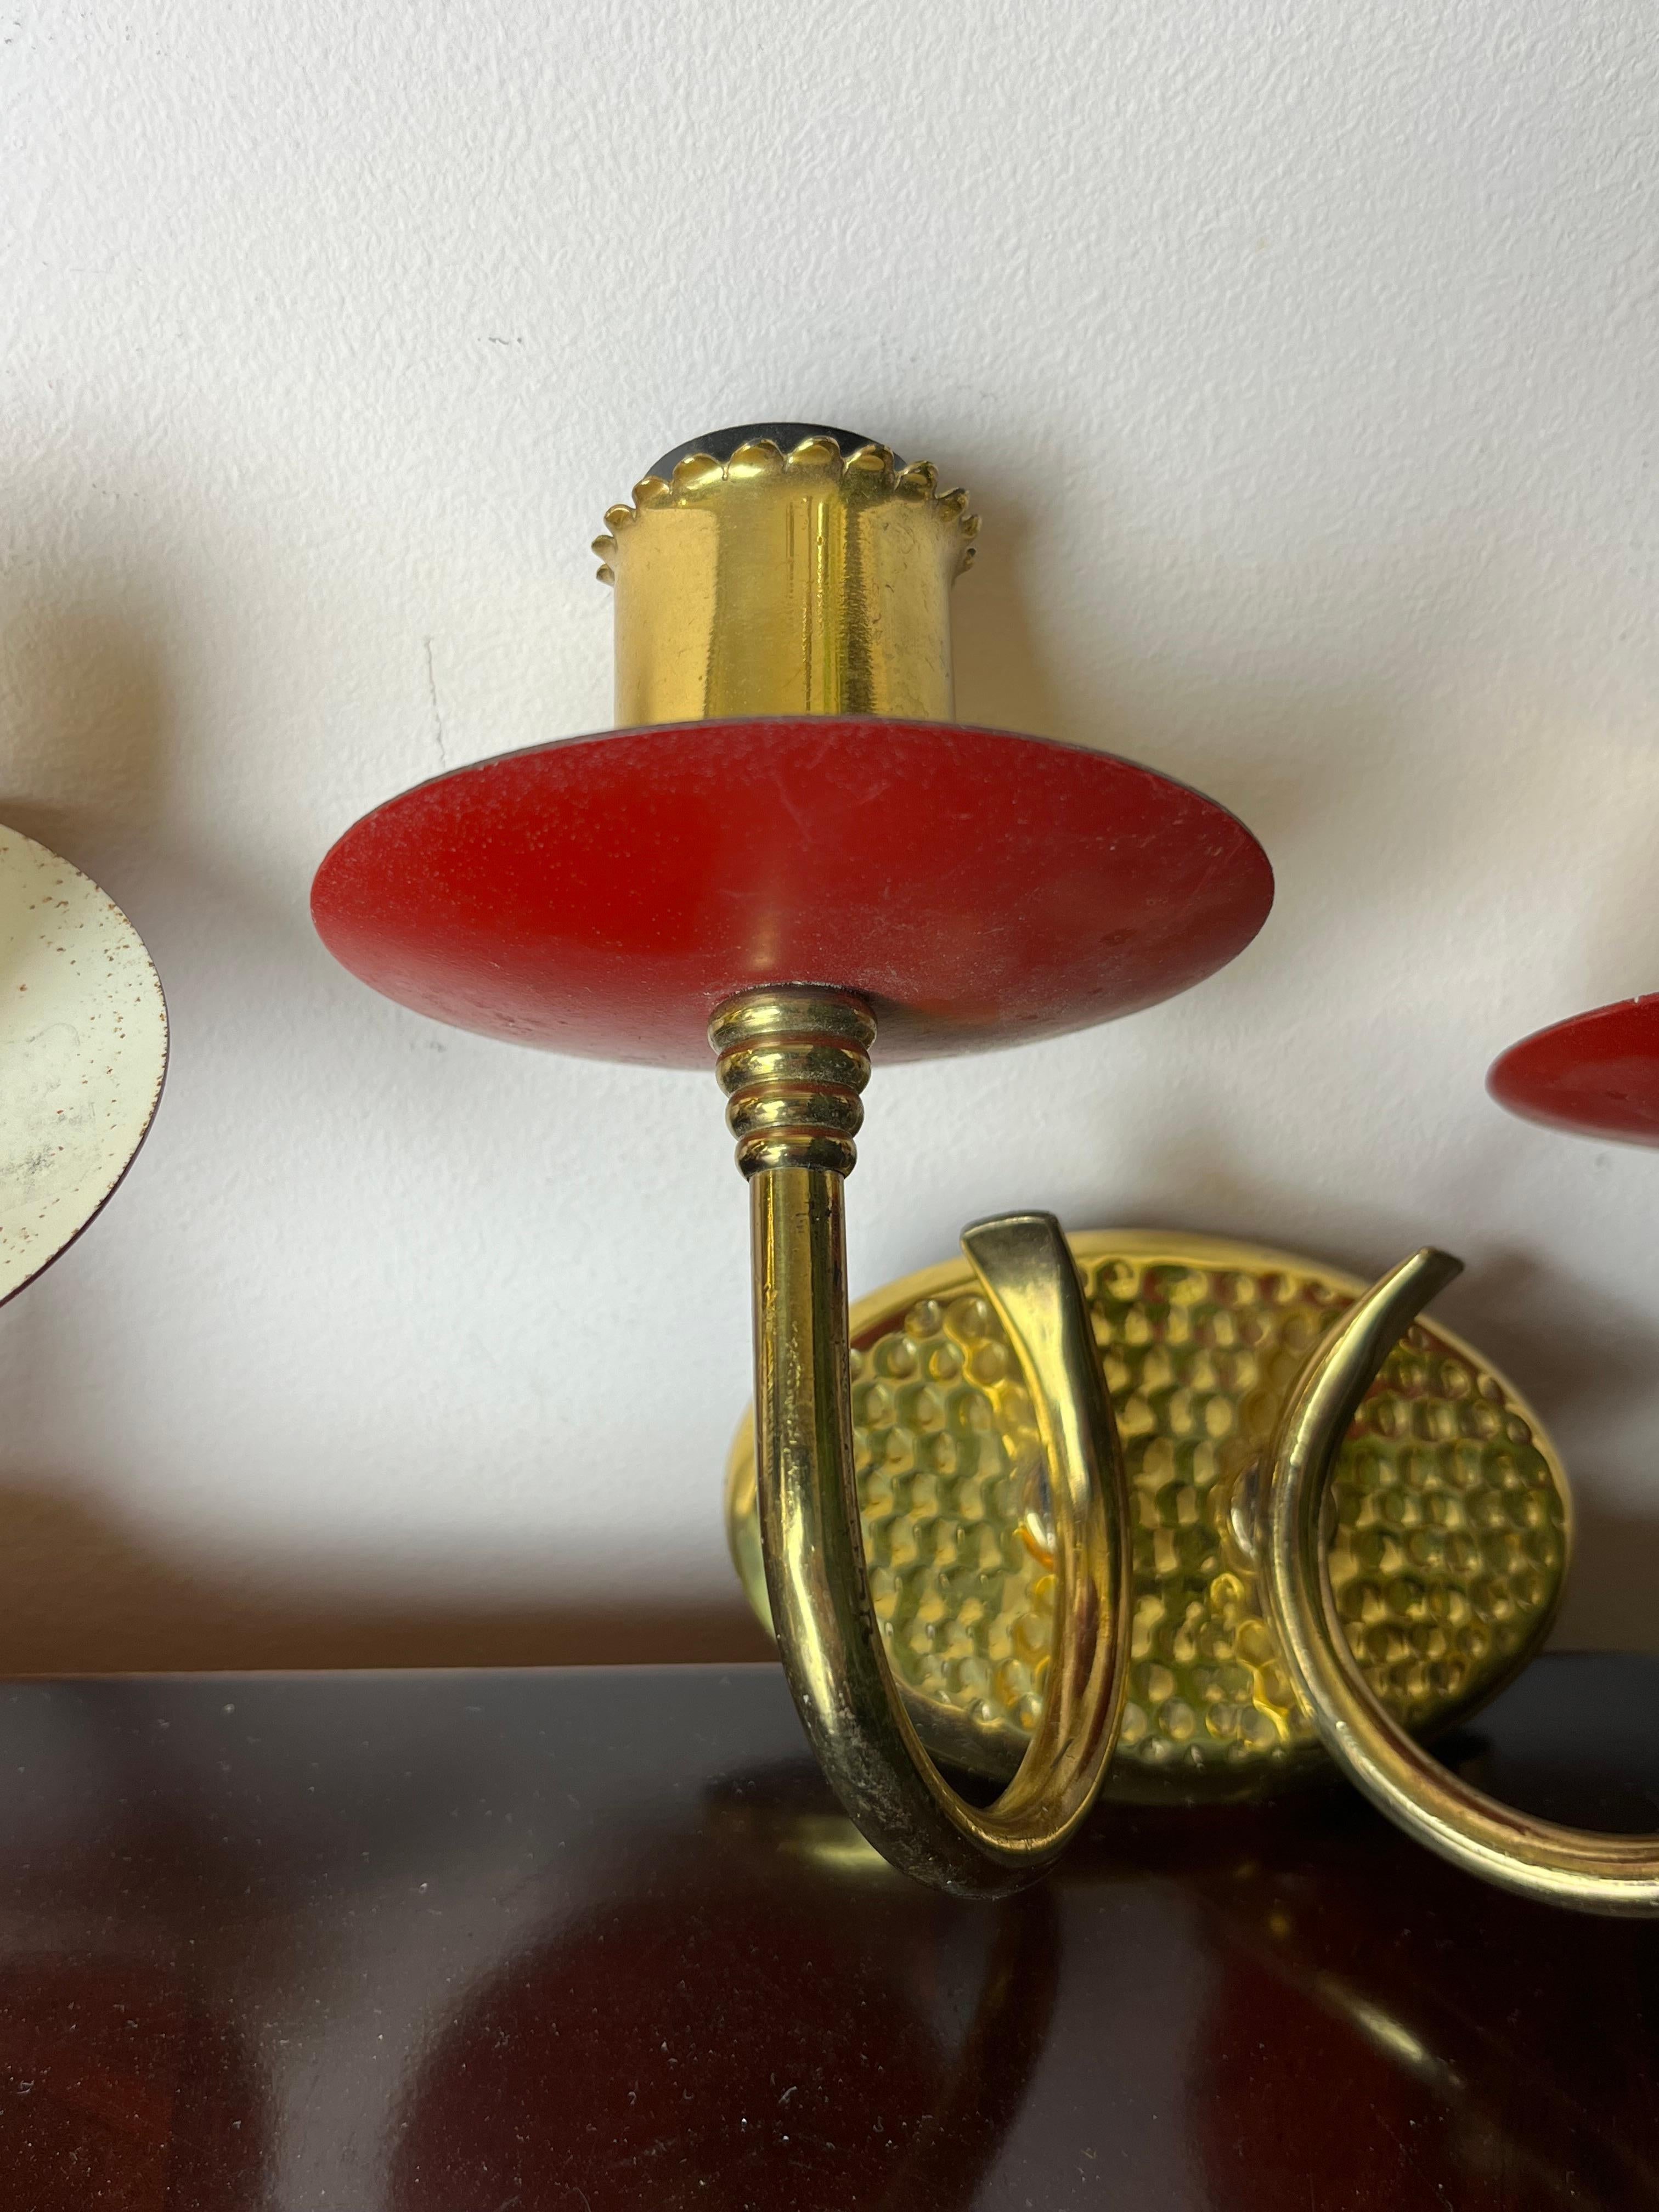 Set of 2 Wall Lamps in Brass and Colored Aluminium, Made in Italy, 1950s For Sale 2